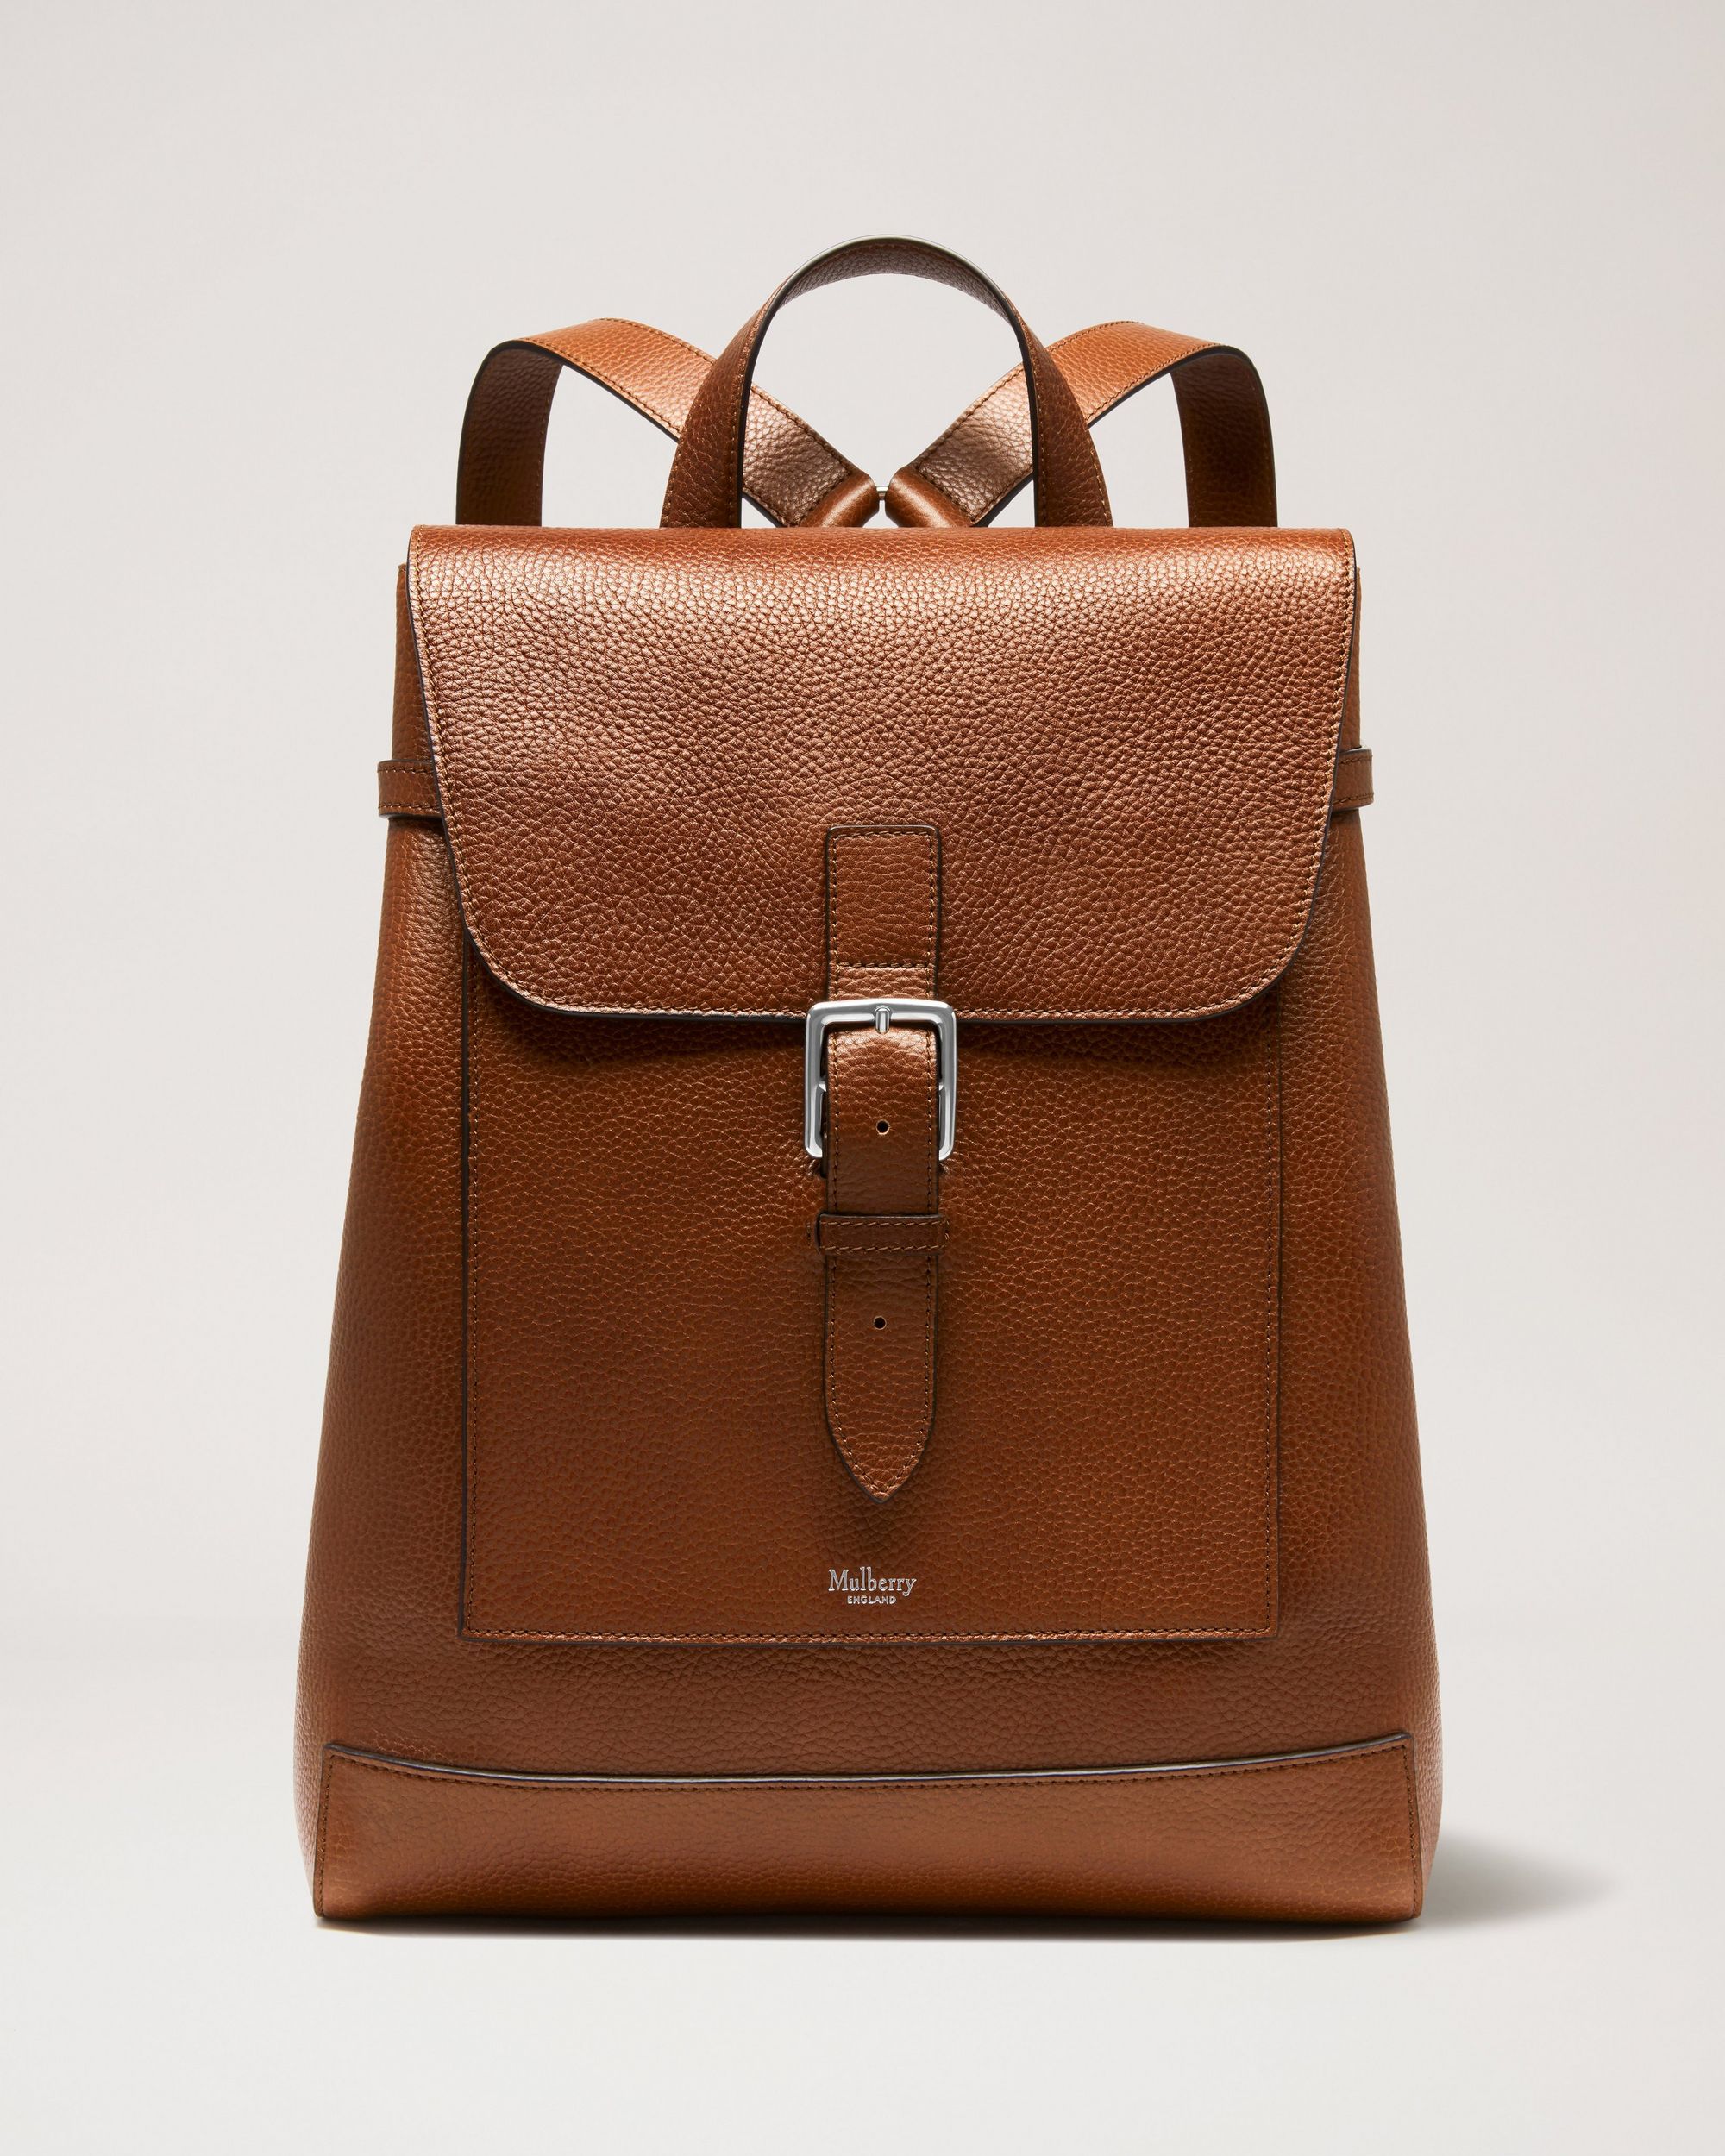 Brown Mulberry briefcase backpack